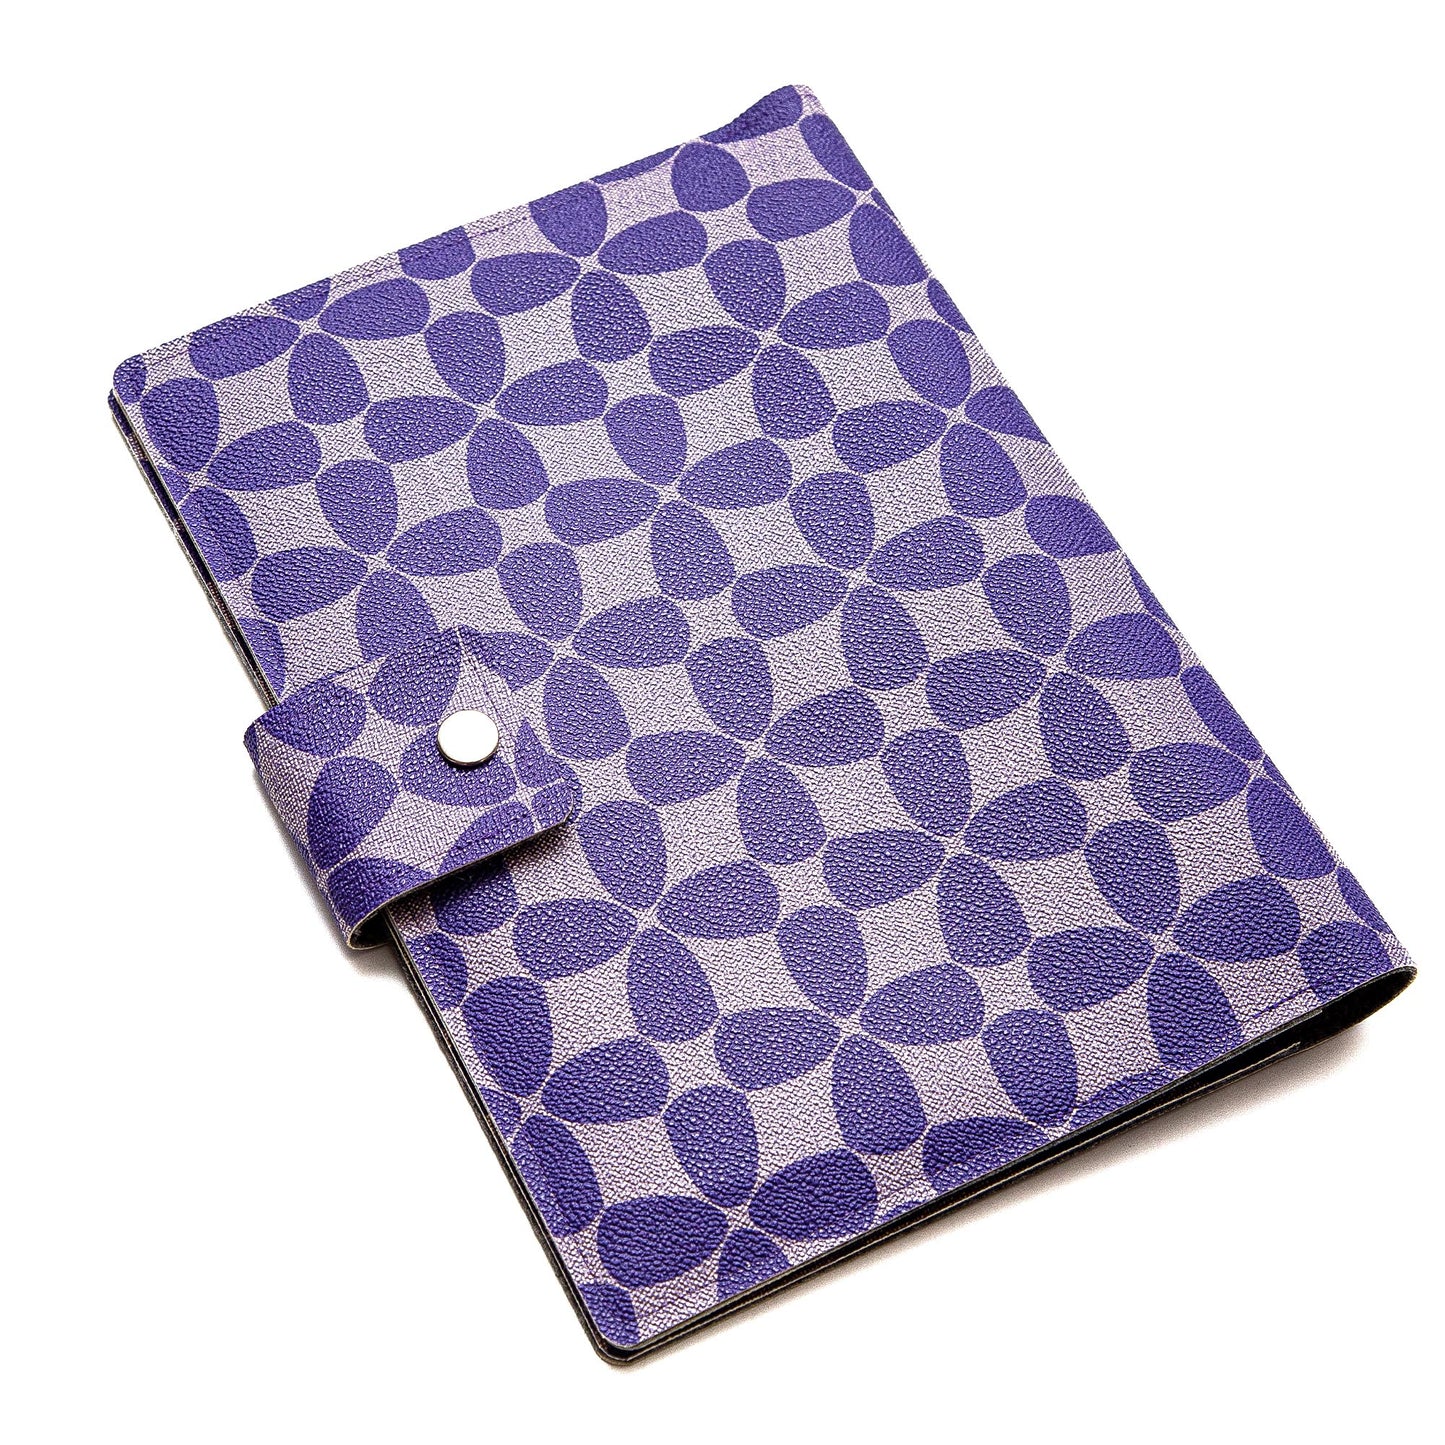 Handmade Folio Cover for iPad/Pro/Air - Purple Abstract Faux Leather